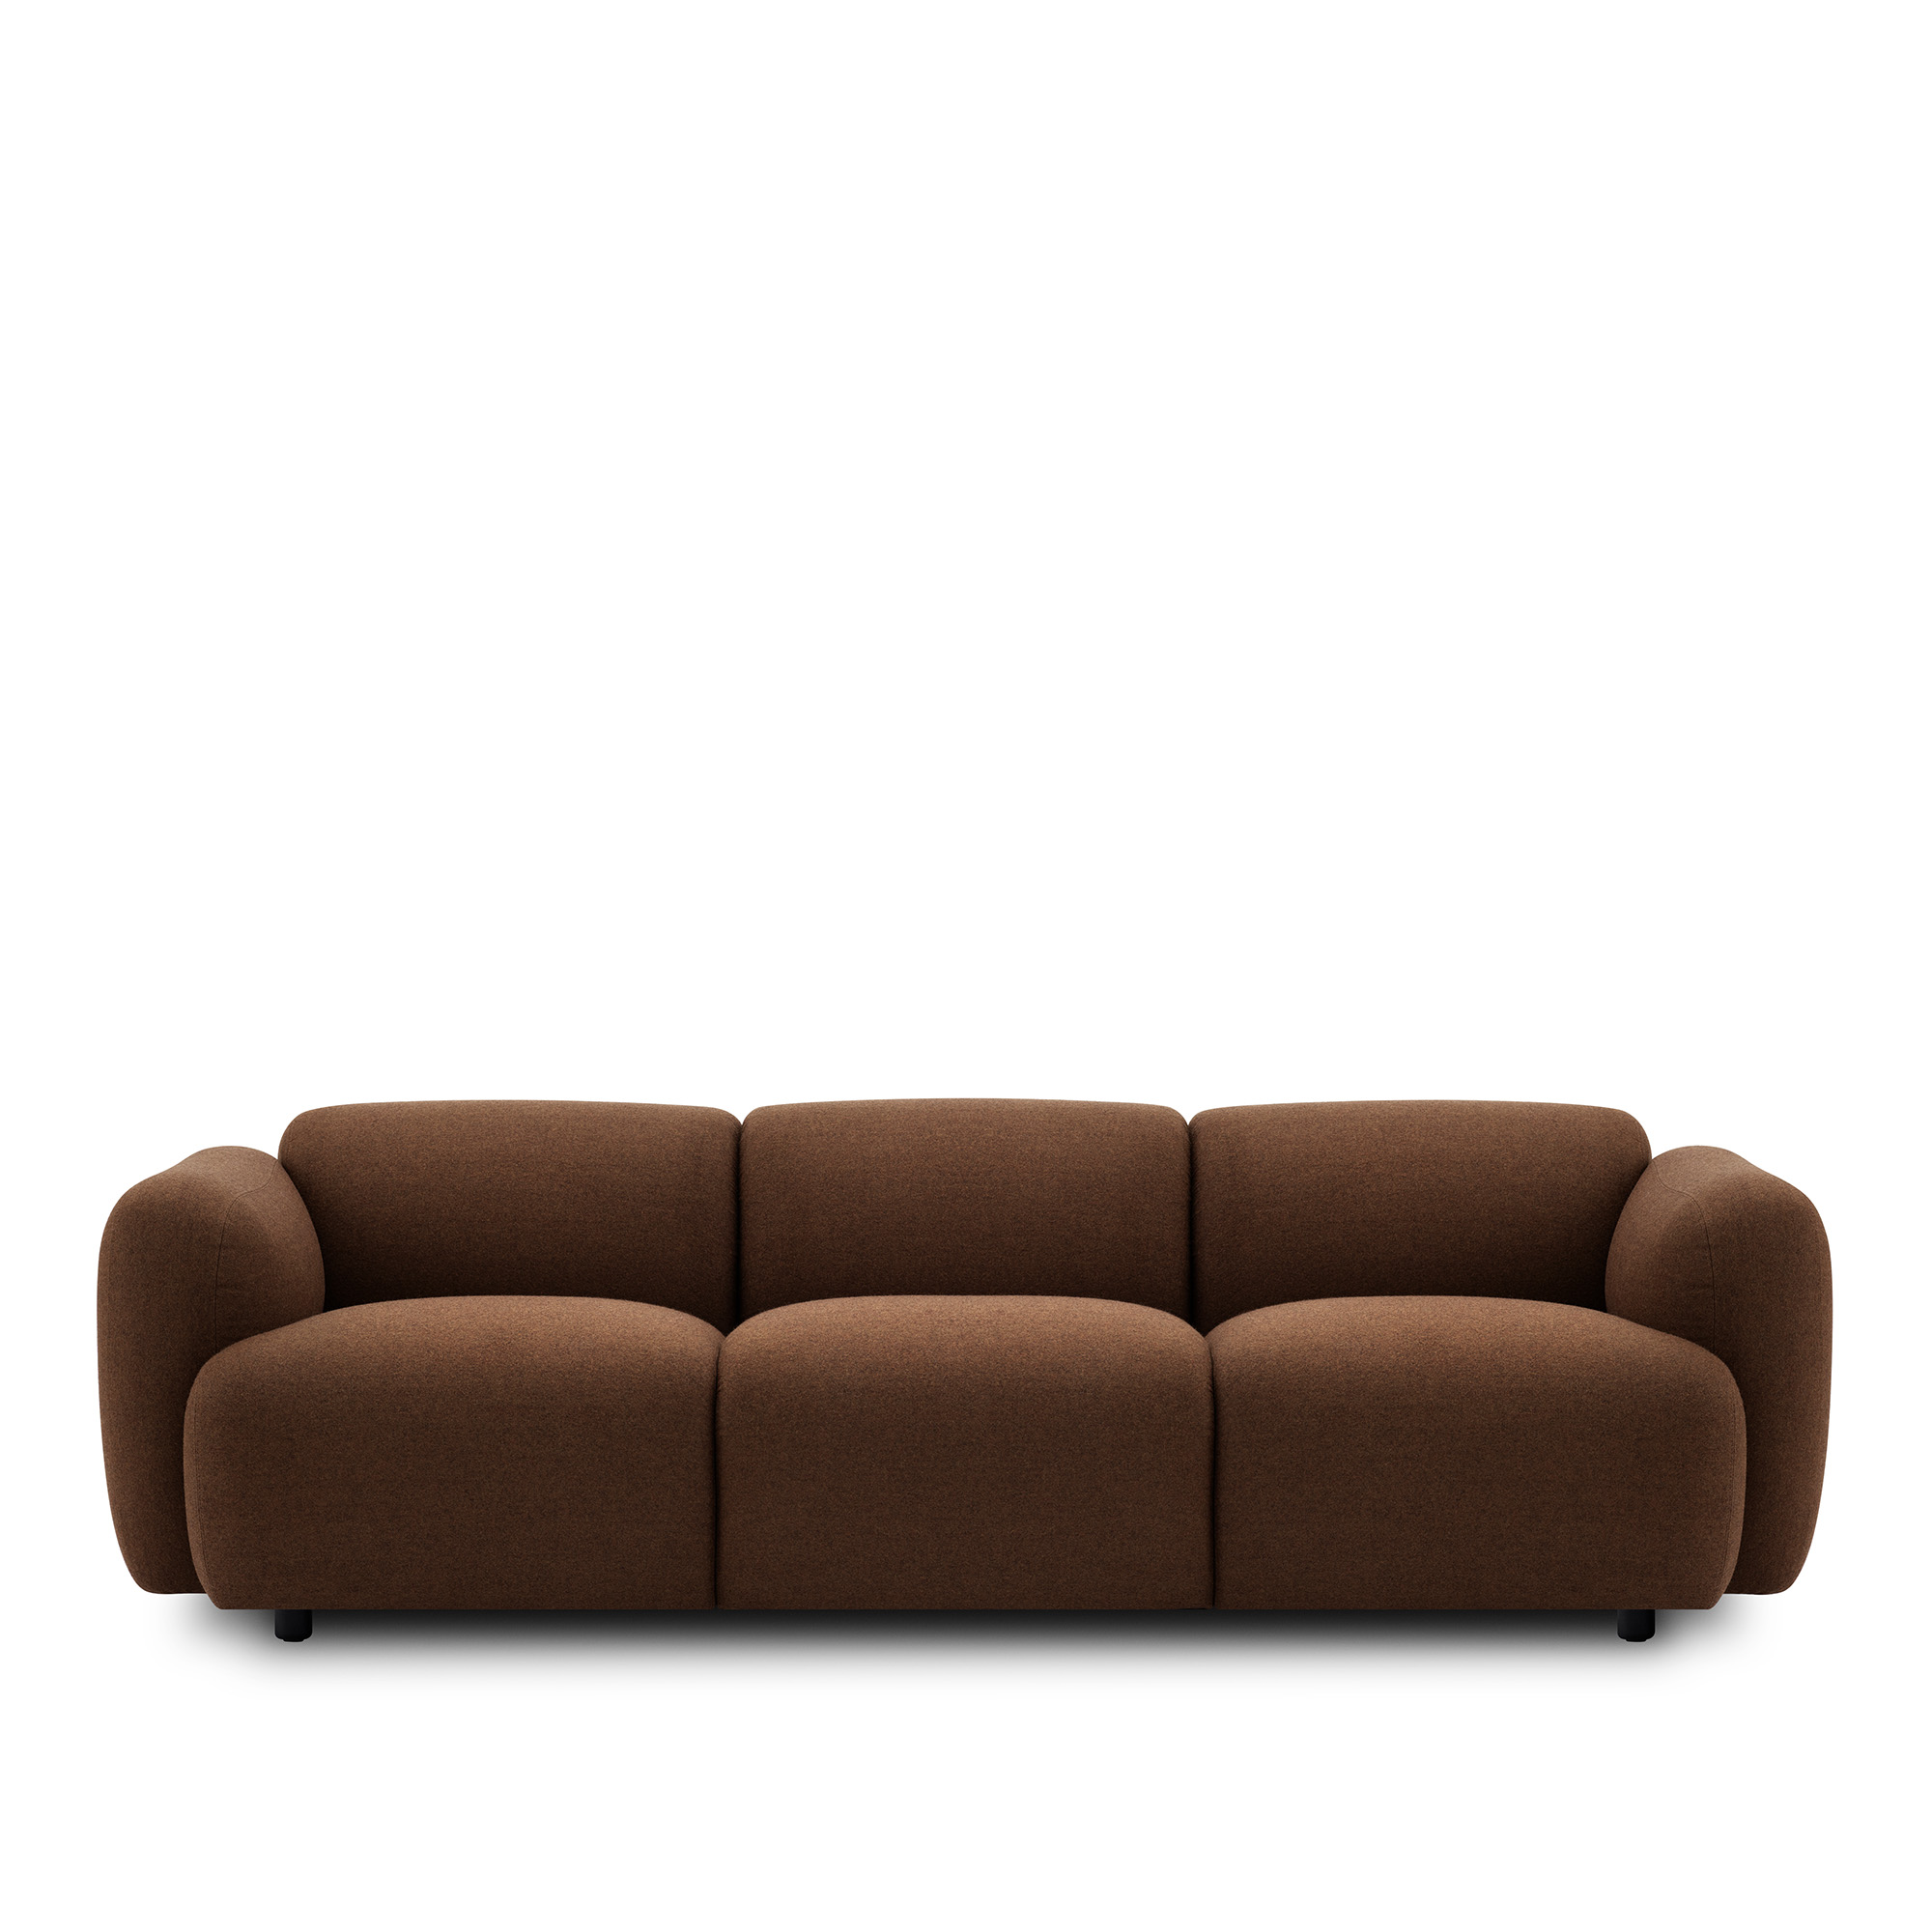 Swell Sofa 3 Seater - LDS39